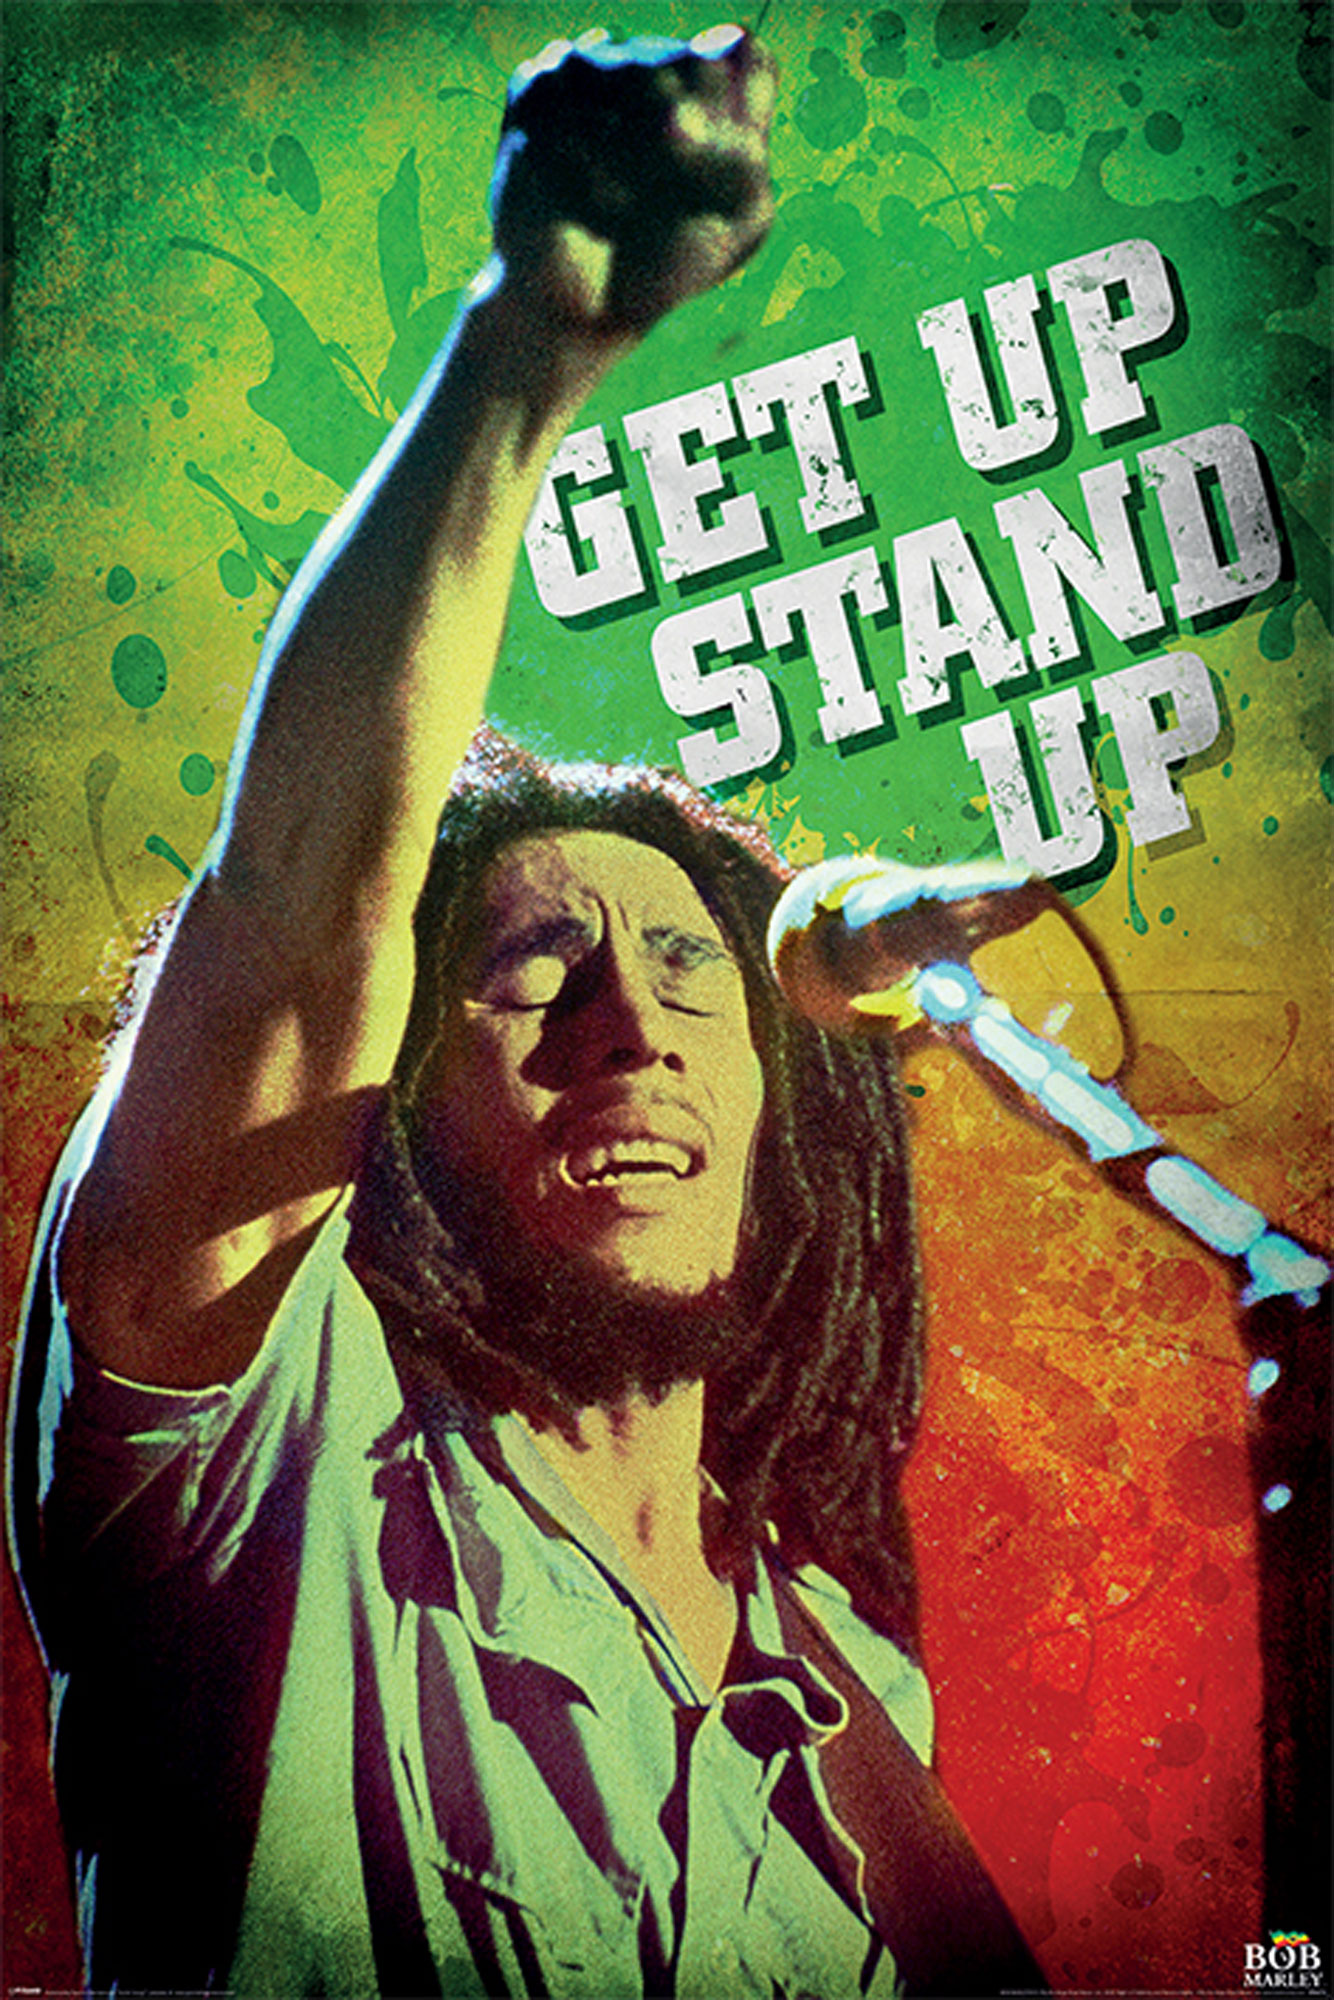 Marley, Bob - Stand Up Get Up